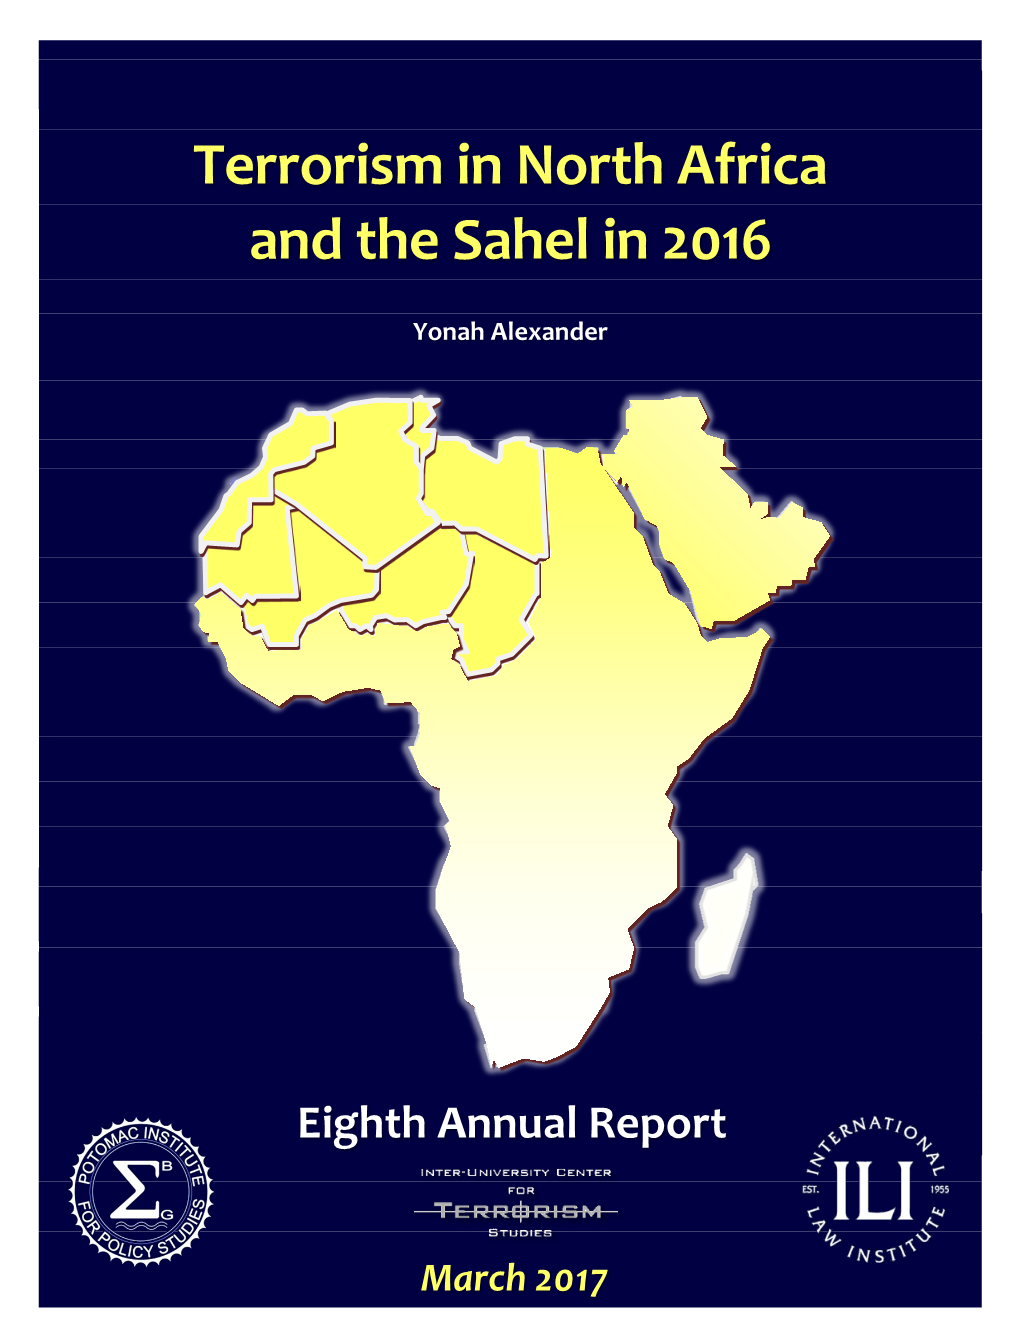 Terrorism in North Africa and the Sahel in 2016